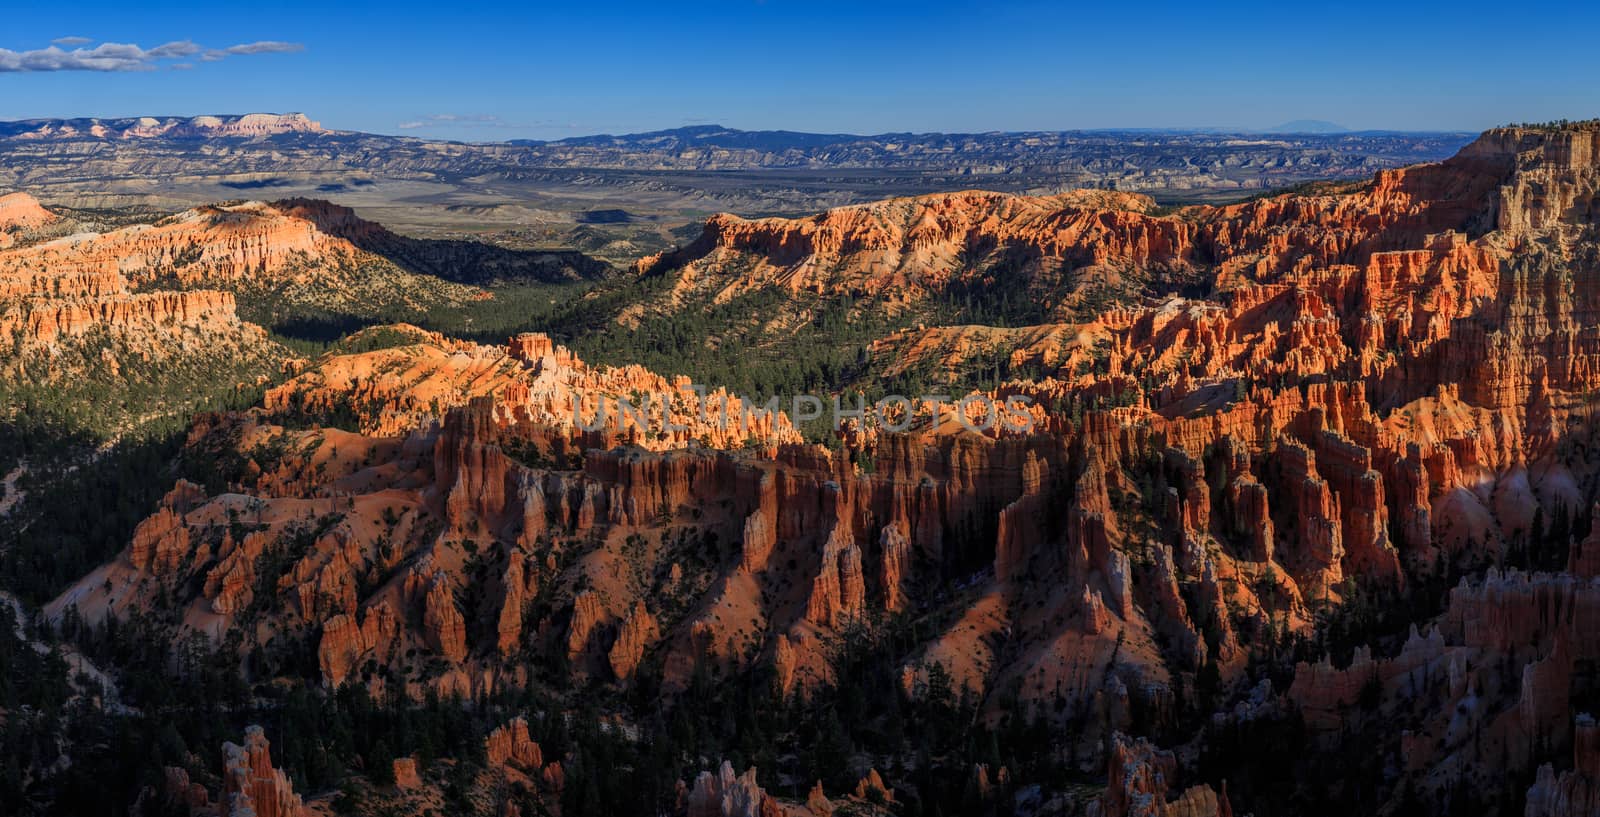 Amazing scenic view of the hoodoos. Bryce Canyon National Park, Utah, US